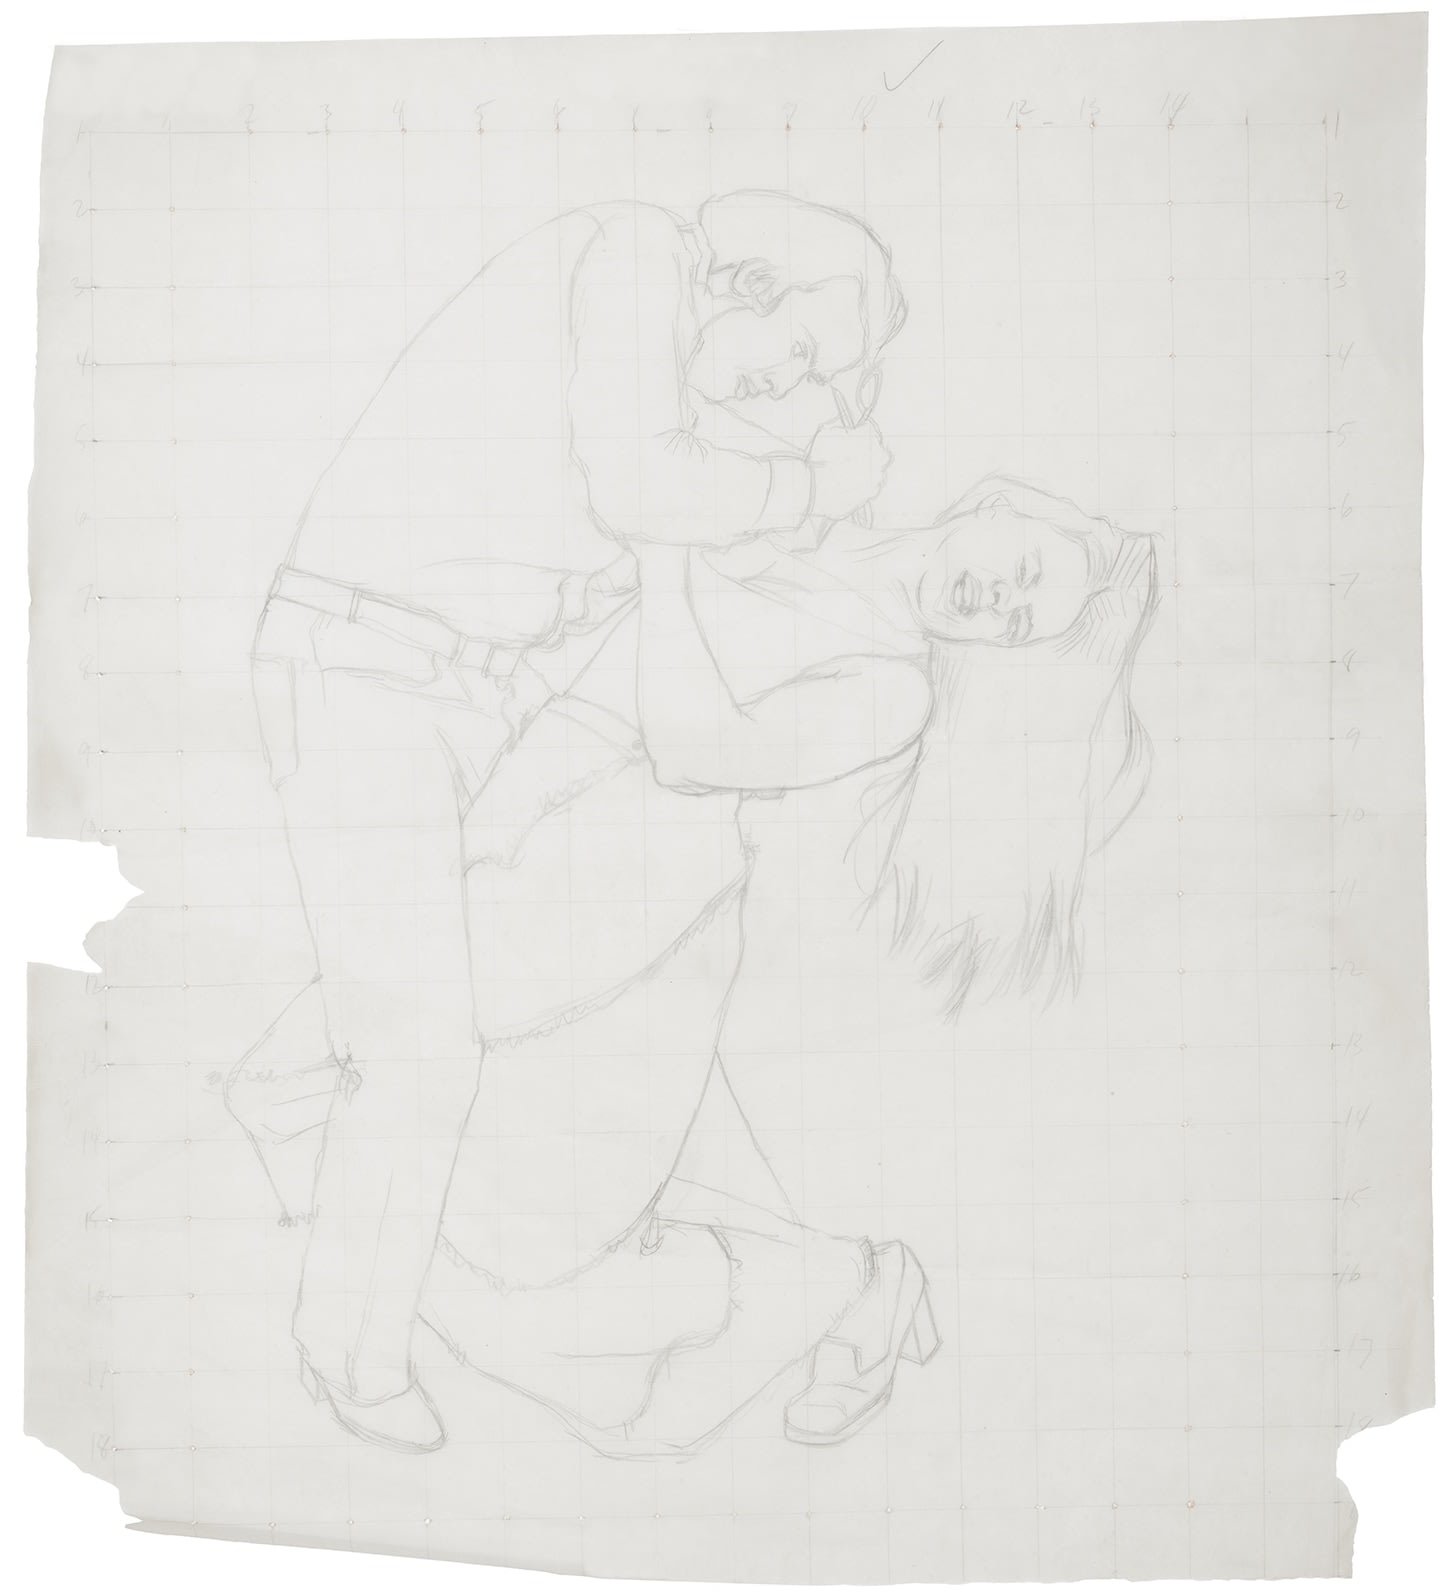 Drawing of man stabbing woman in the clavicle area